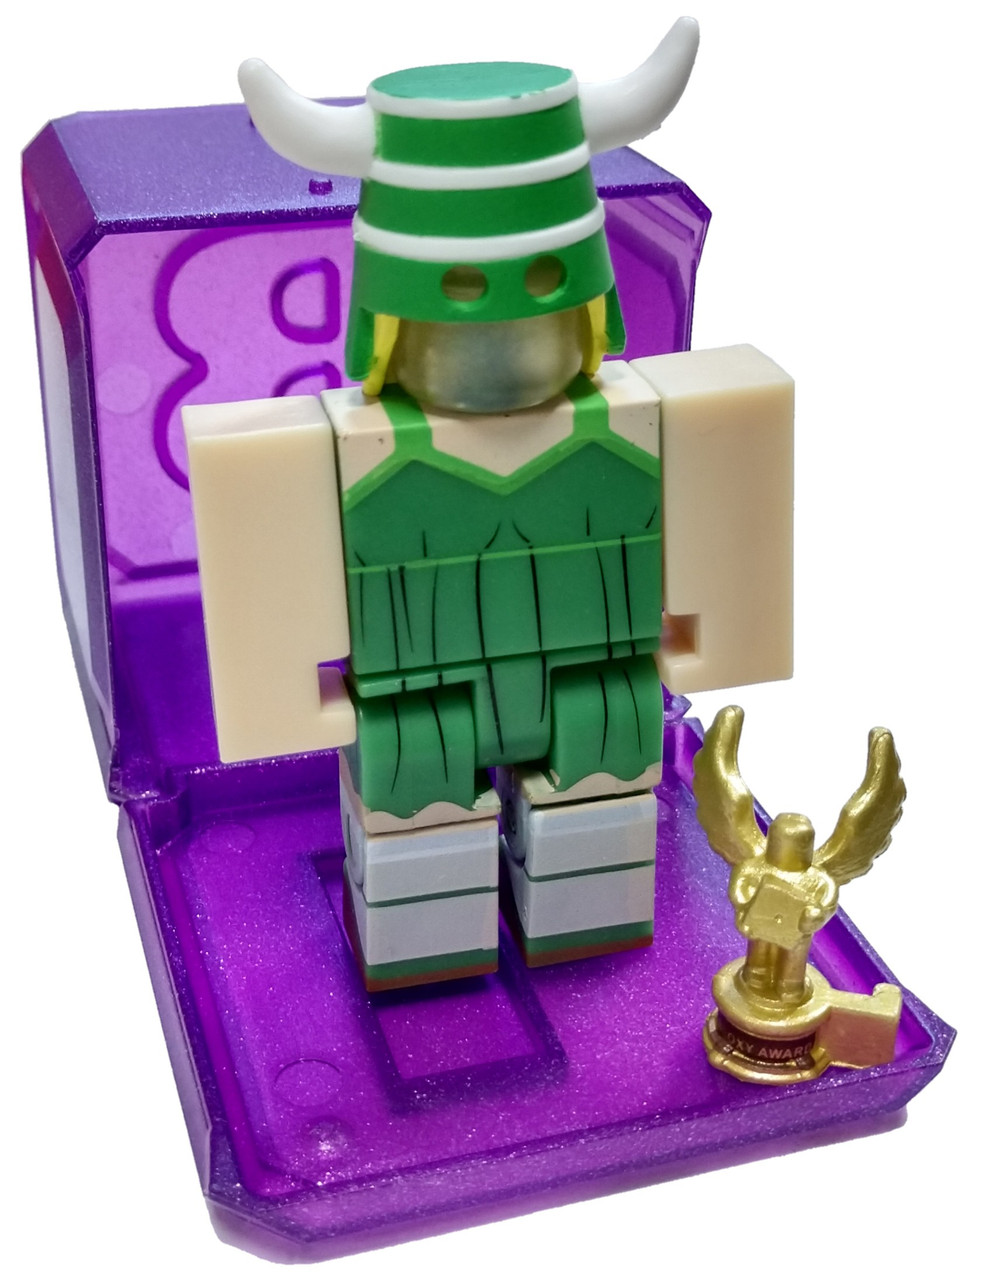 Roblox Celebrity Collection Series 3 Missshu 3 Mini Figure With Cube And Online Code Loose Jazwares Toywiz - codes for view music for wolves life 3 roblox